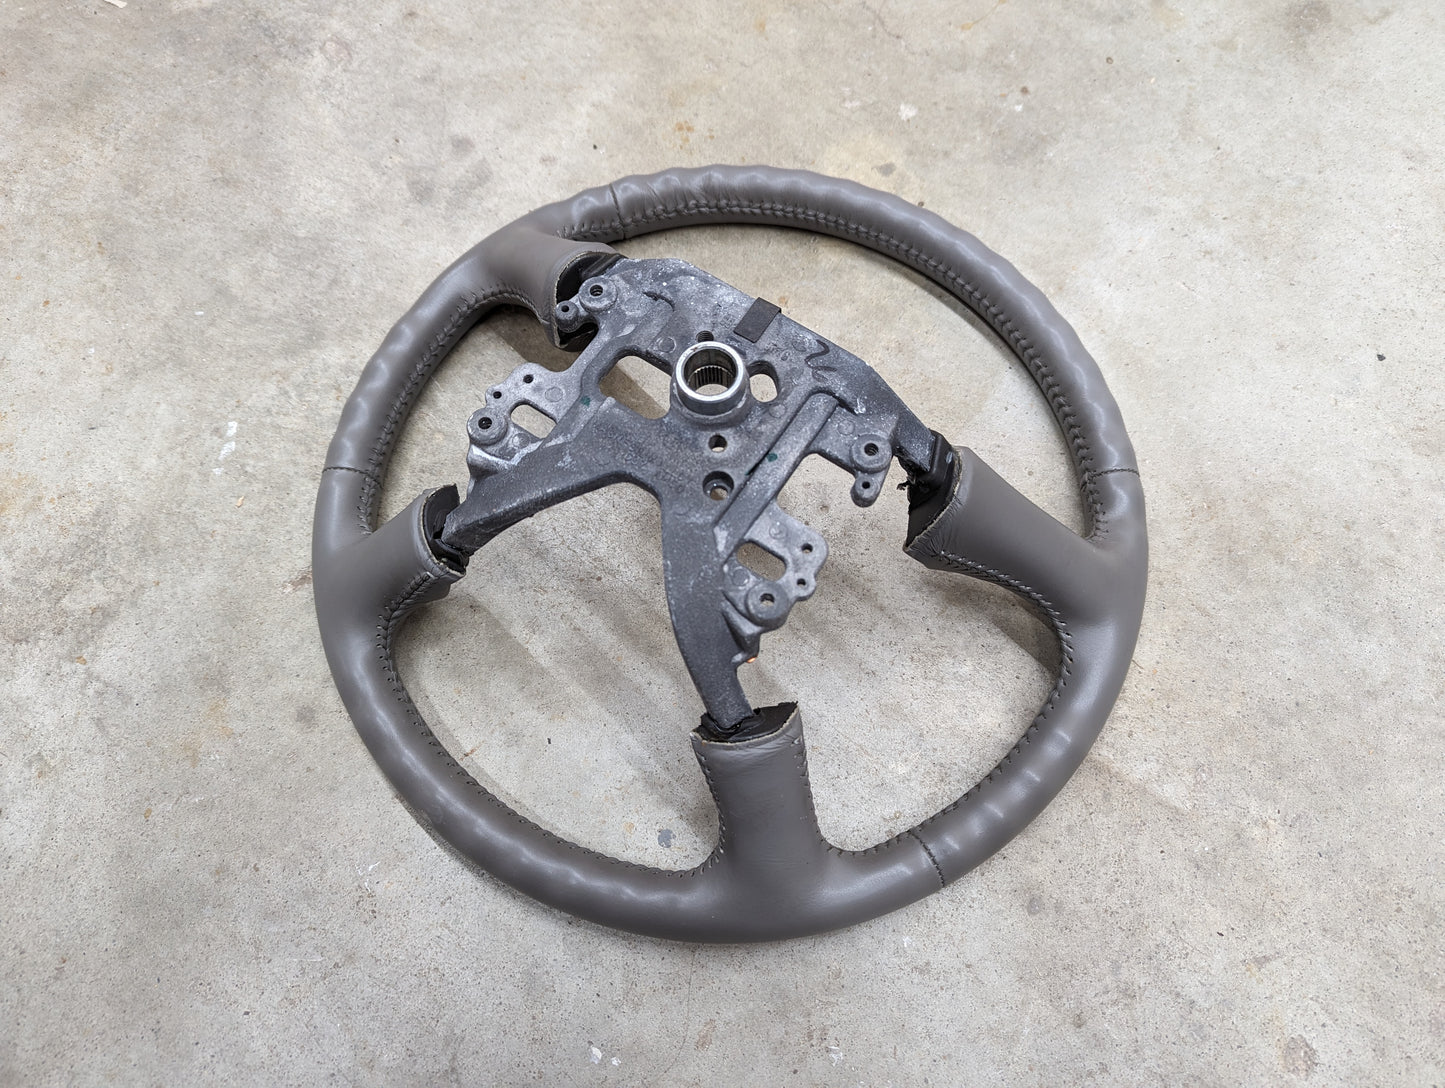 OEM Leather Steering Wheel in Gray for 1999-2005 GMC Denali Chevy Silverado S10 and more